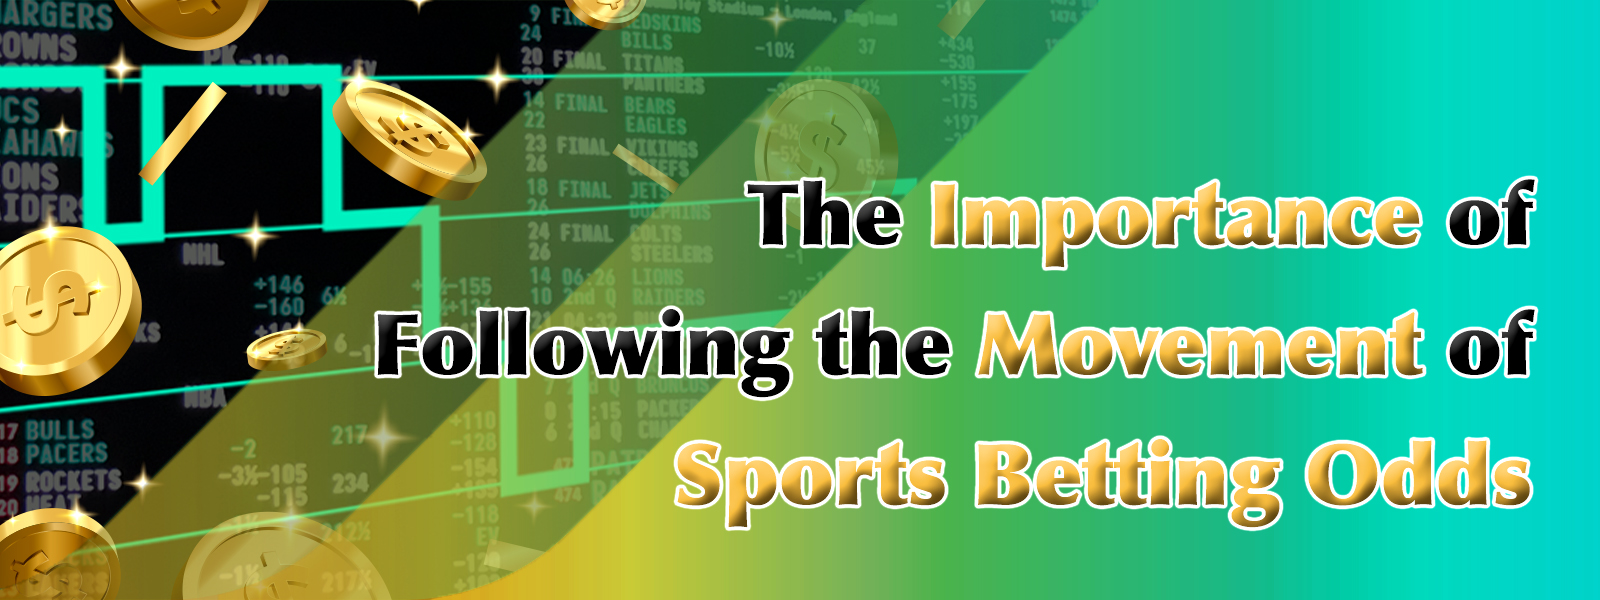 The Importance Of Following The Movement Of Sports Betting Odds